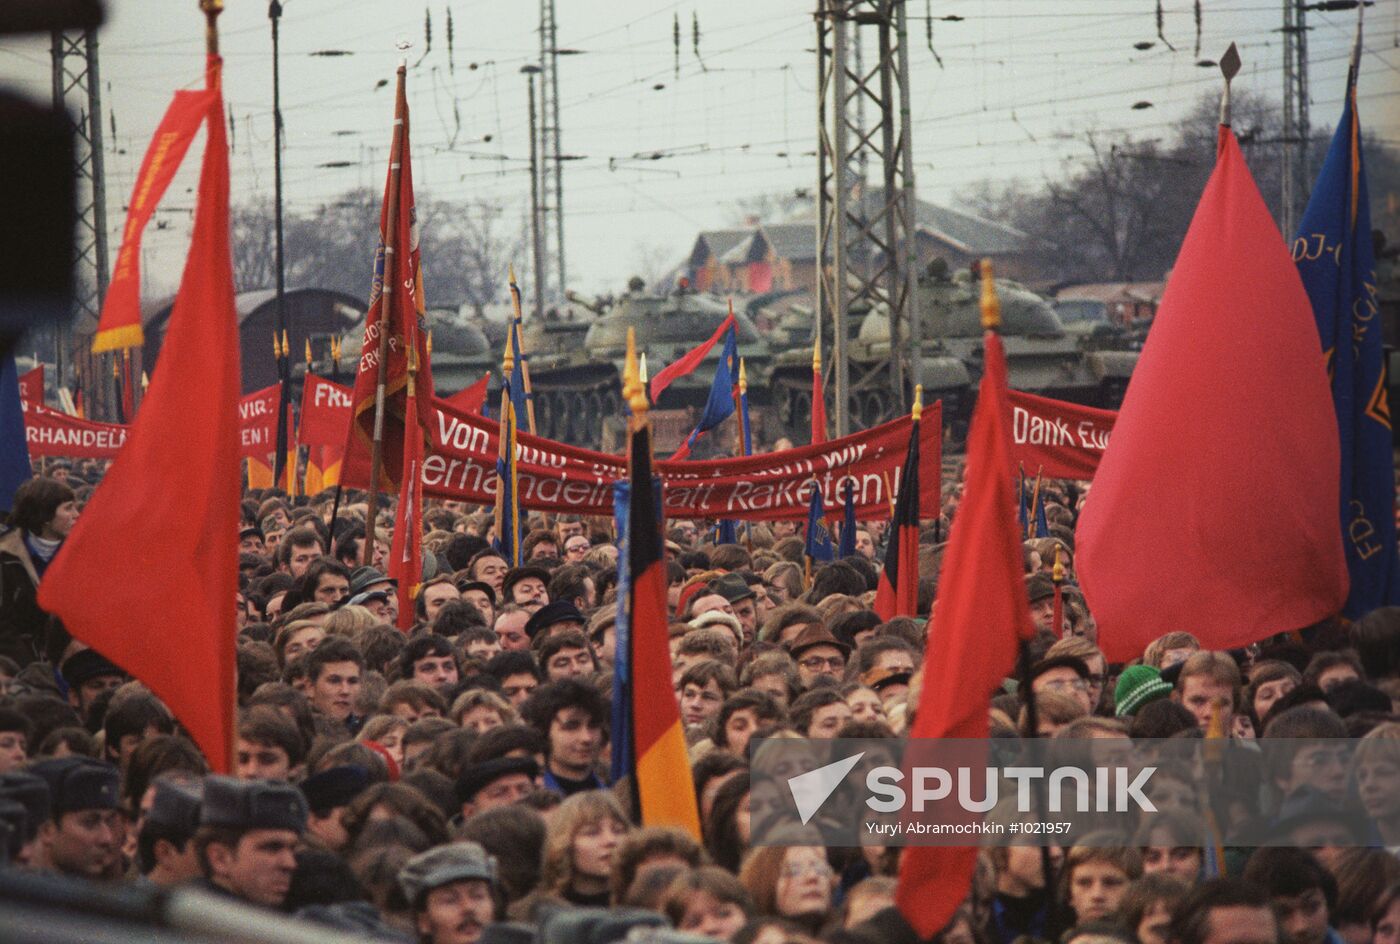 Soviet troops withdraw from GDR